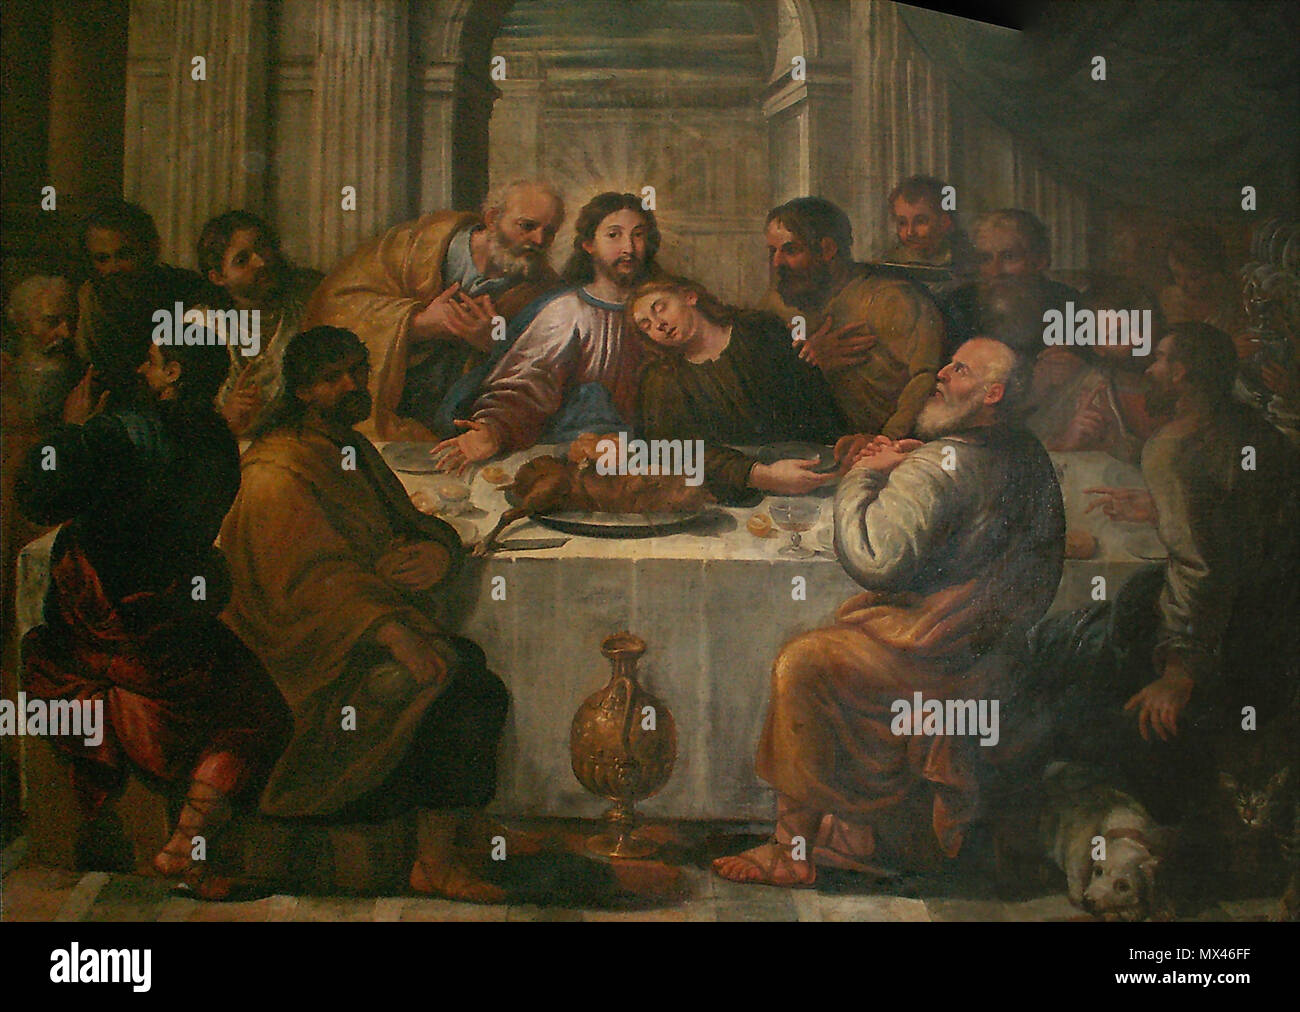 . English: The Last Supper by Palma il Vecchio, National Gallery for Foreign Art, Sofia, Bulgaria . 20 May 2006. Edal Anton Lefterov 603 TheLastSupperPalmaVecchio Stock Photo